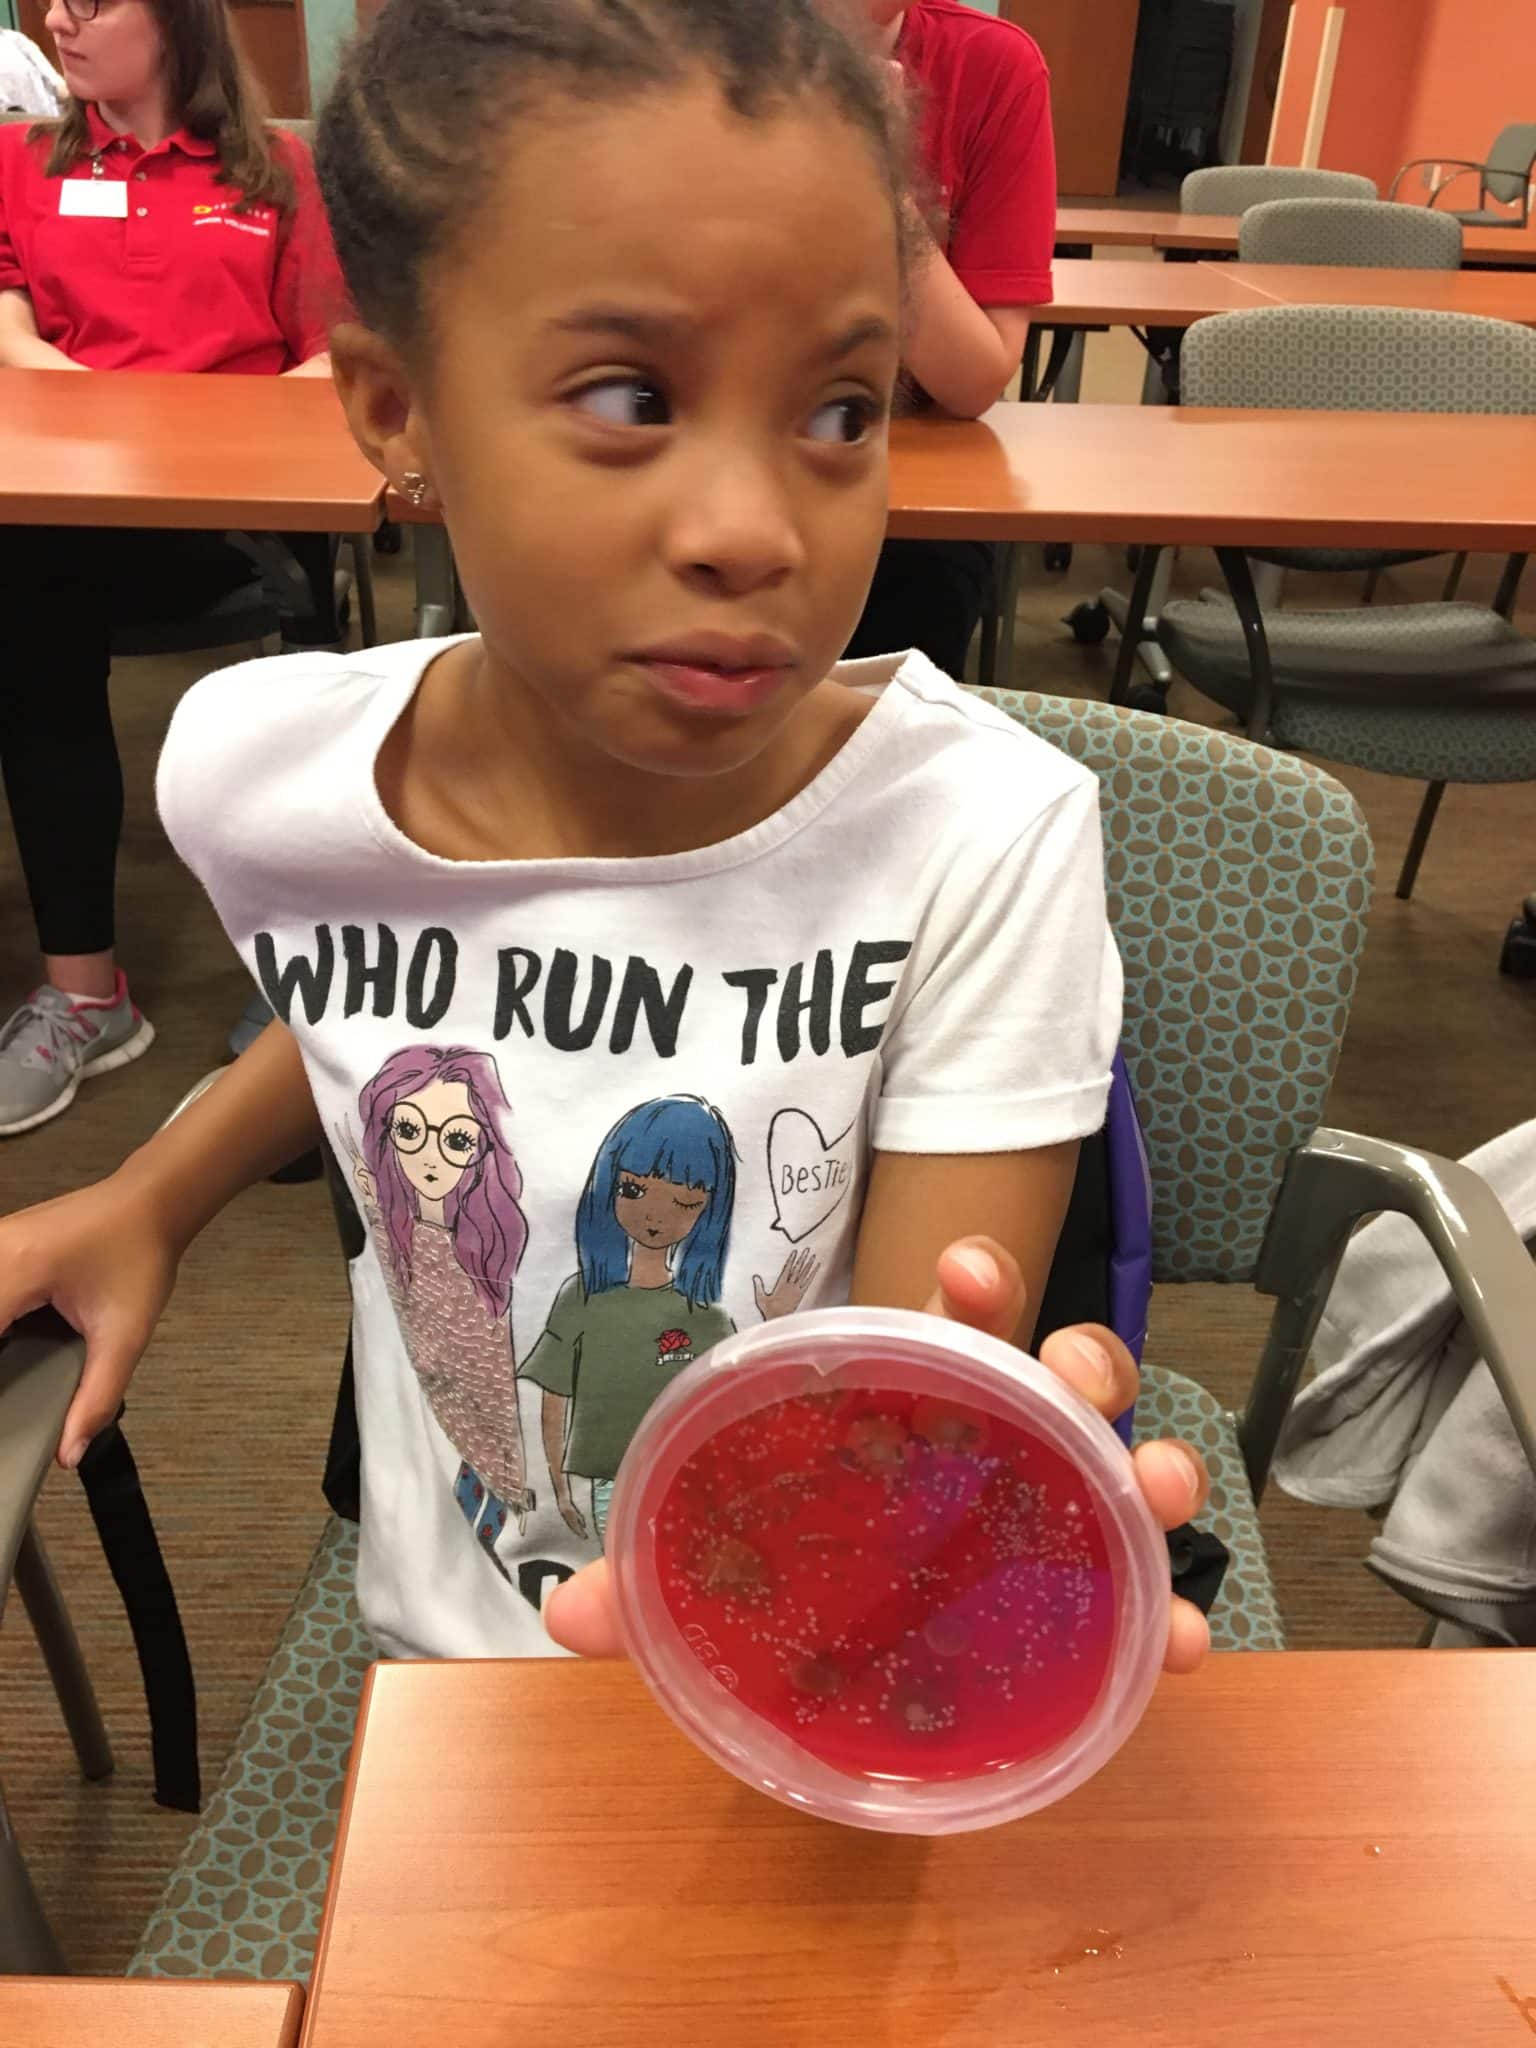 Student is not pleased with the amount of bacteria grown!